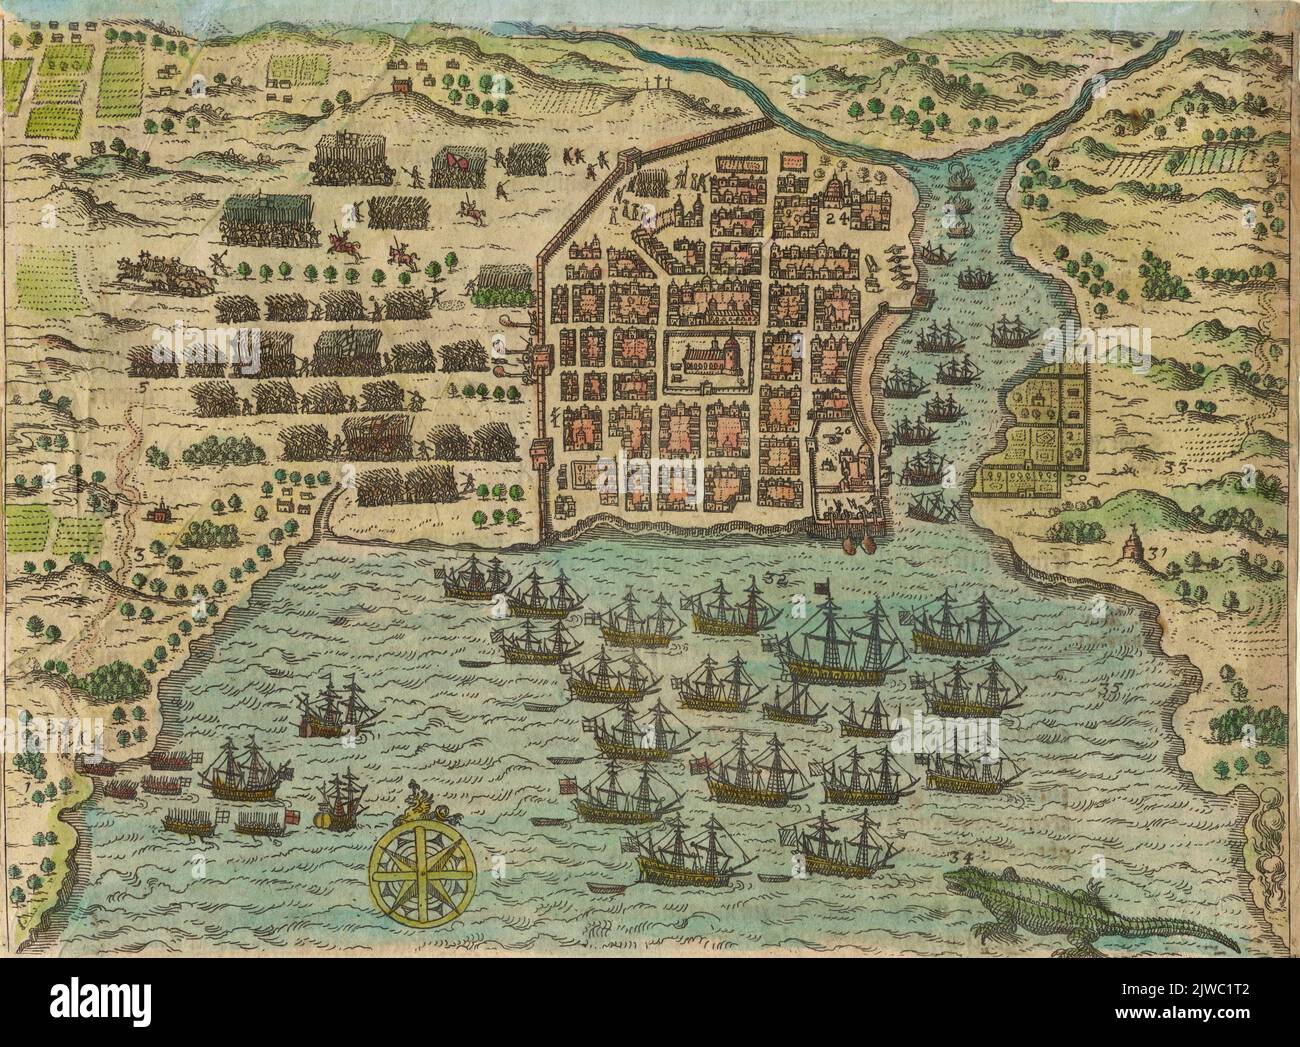 Pictorial map view of Santo Domingo on the island of Hispaniola ca.1585-1586, hand-colored engraving by Theodor de Bry Stock Photo